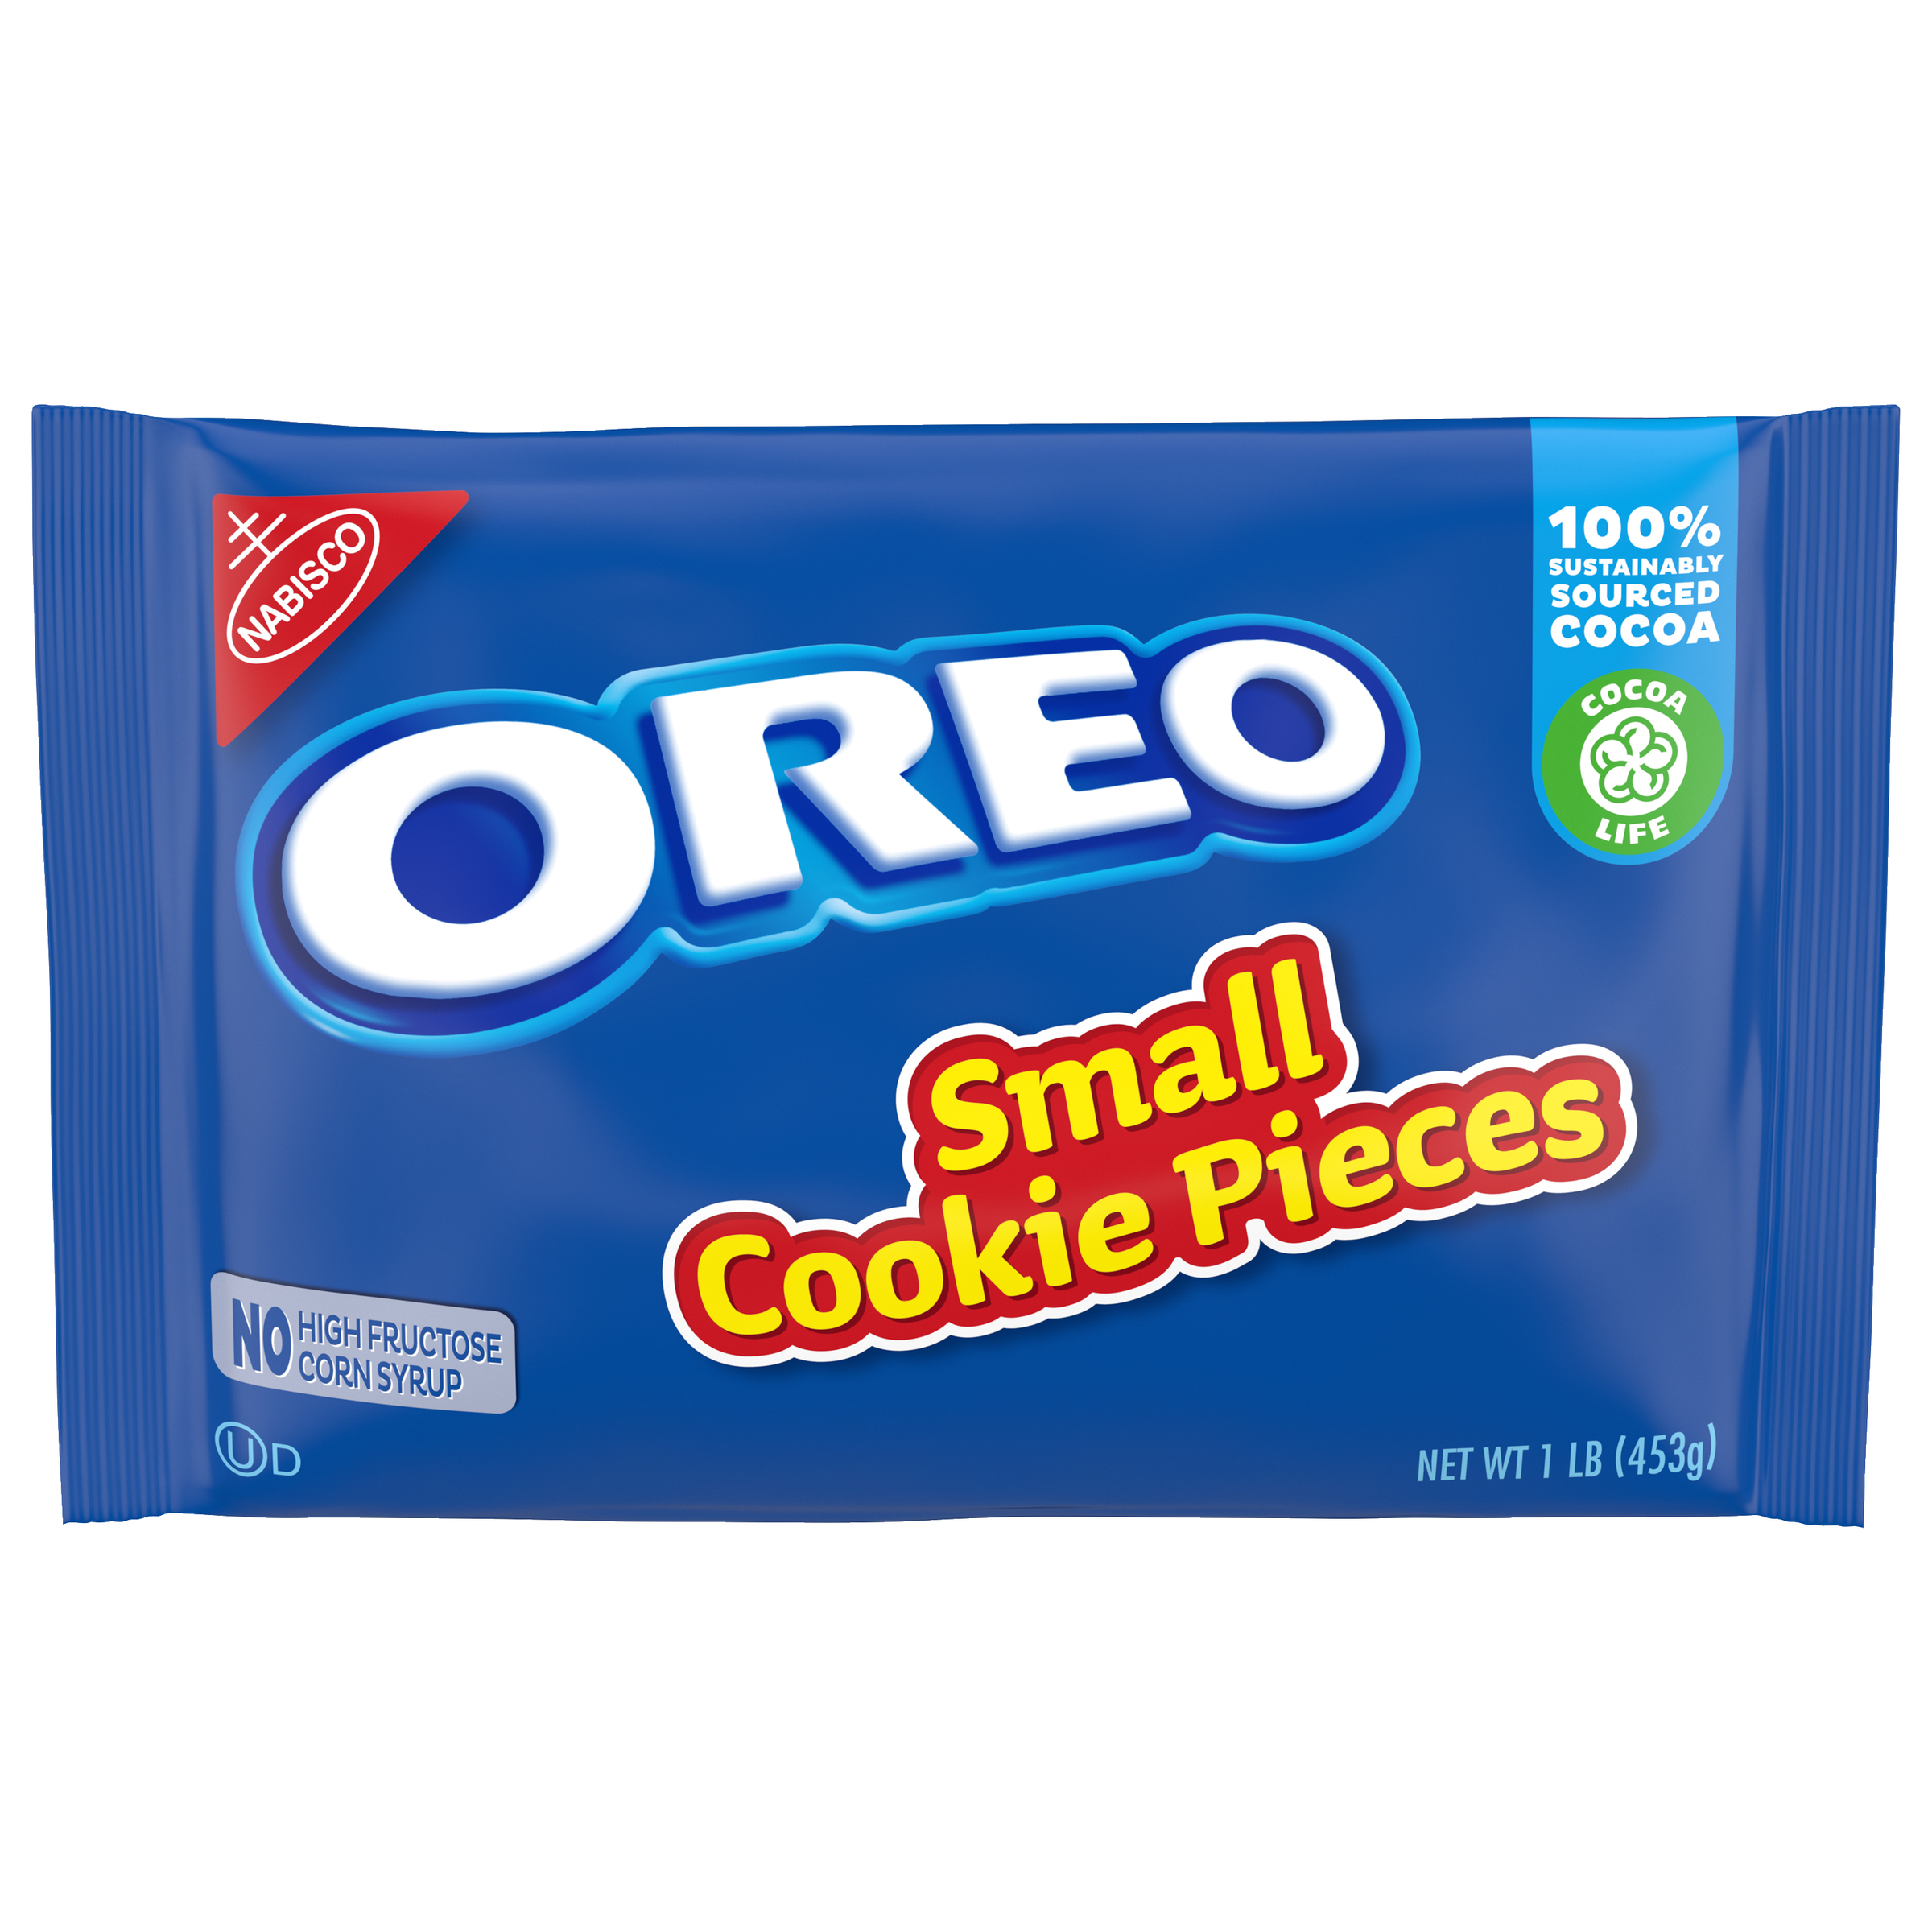 OREO Small Cookie Pieces 12/1 LB